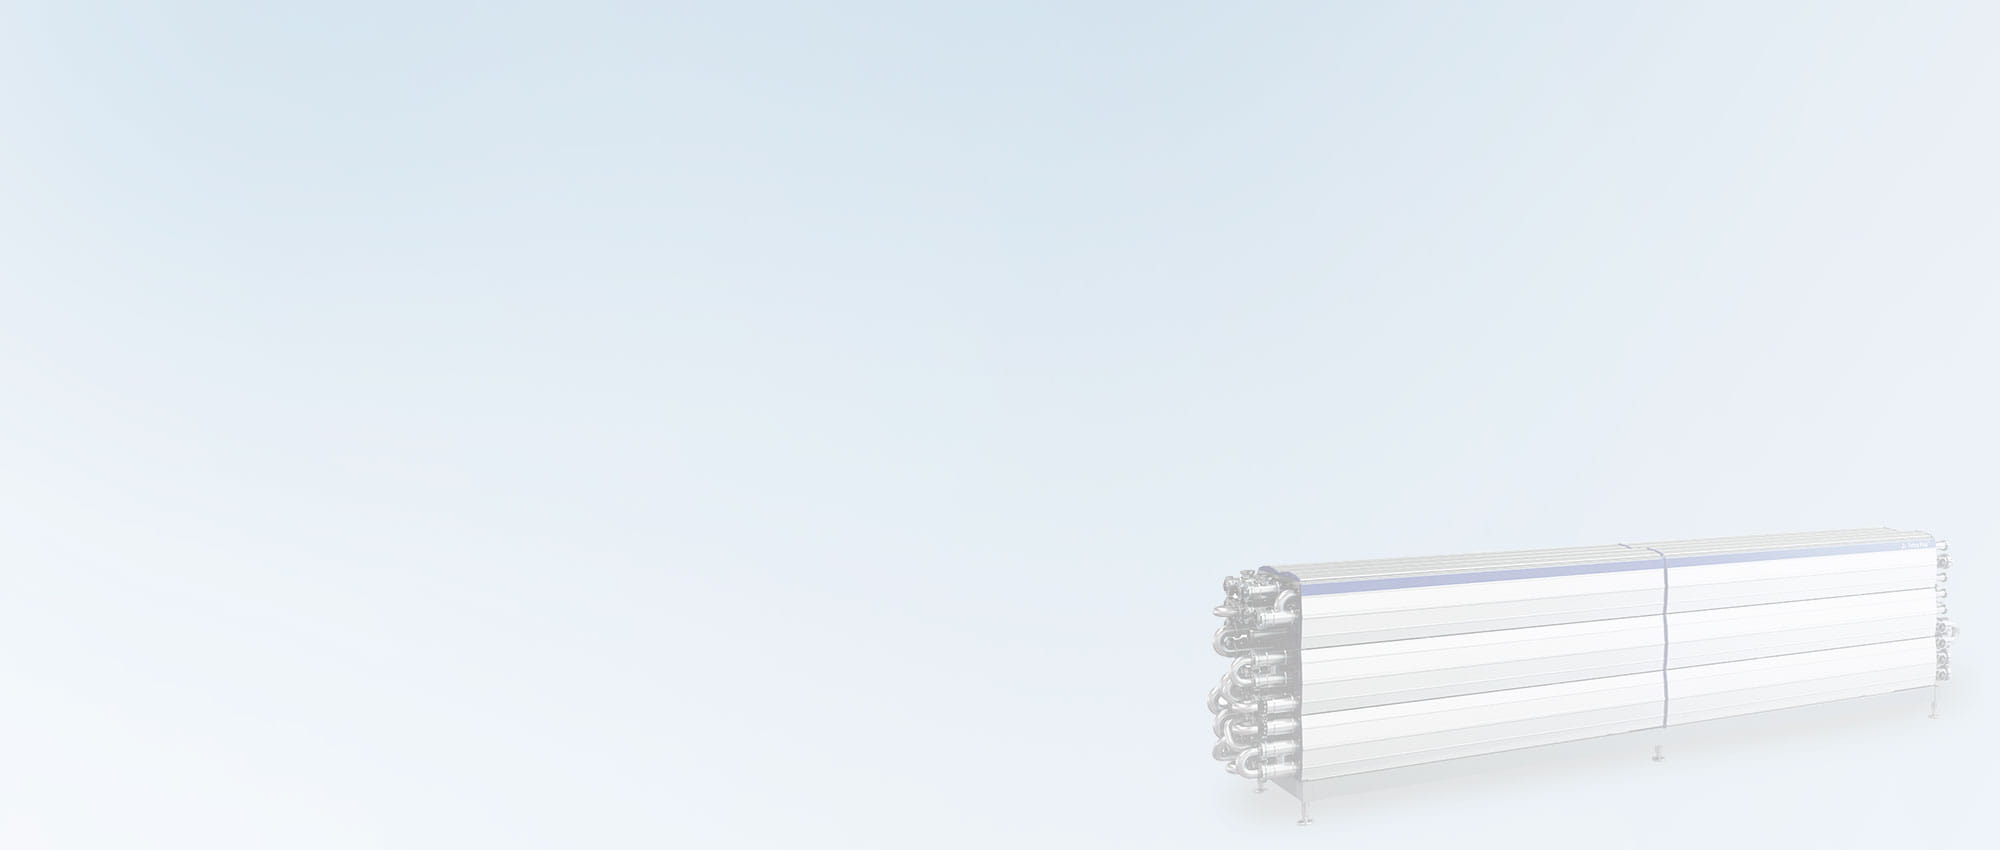 EHEDG-approved tube modules in Tubular Heat Exchanger from Tetra Pak